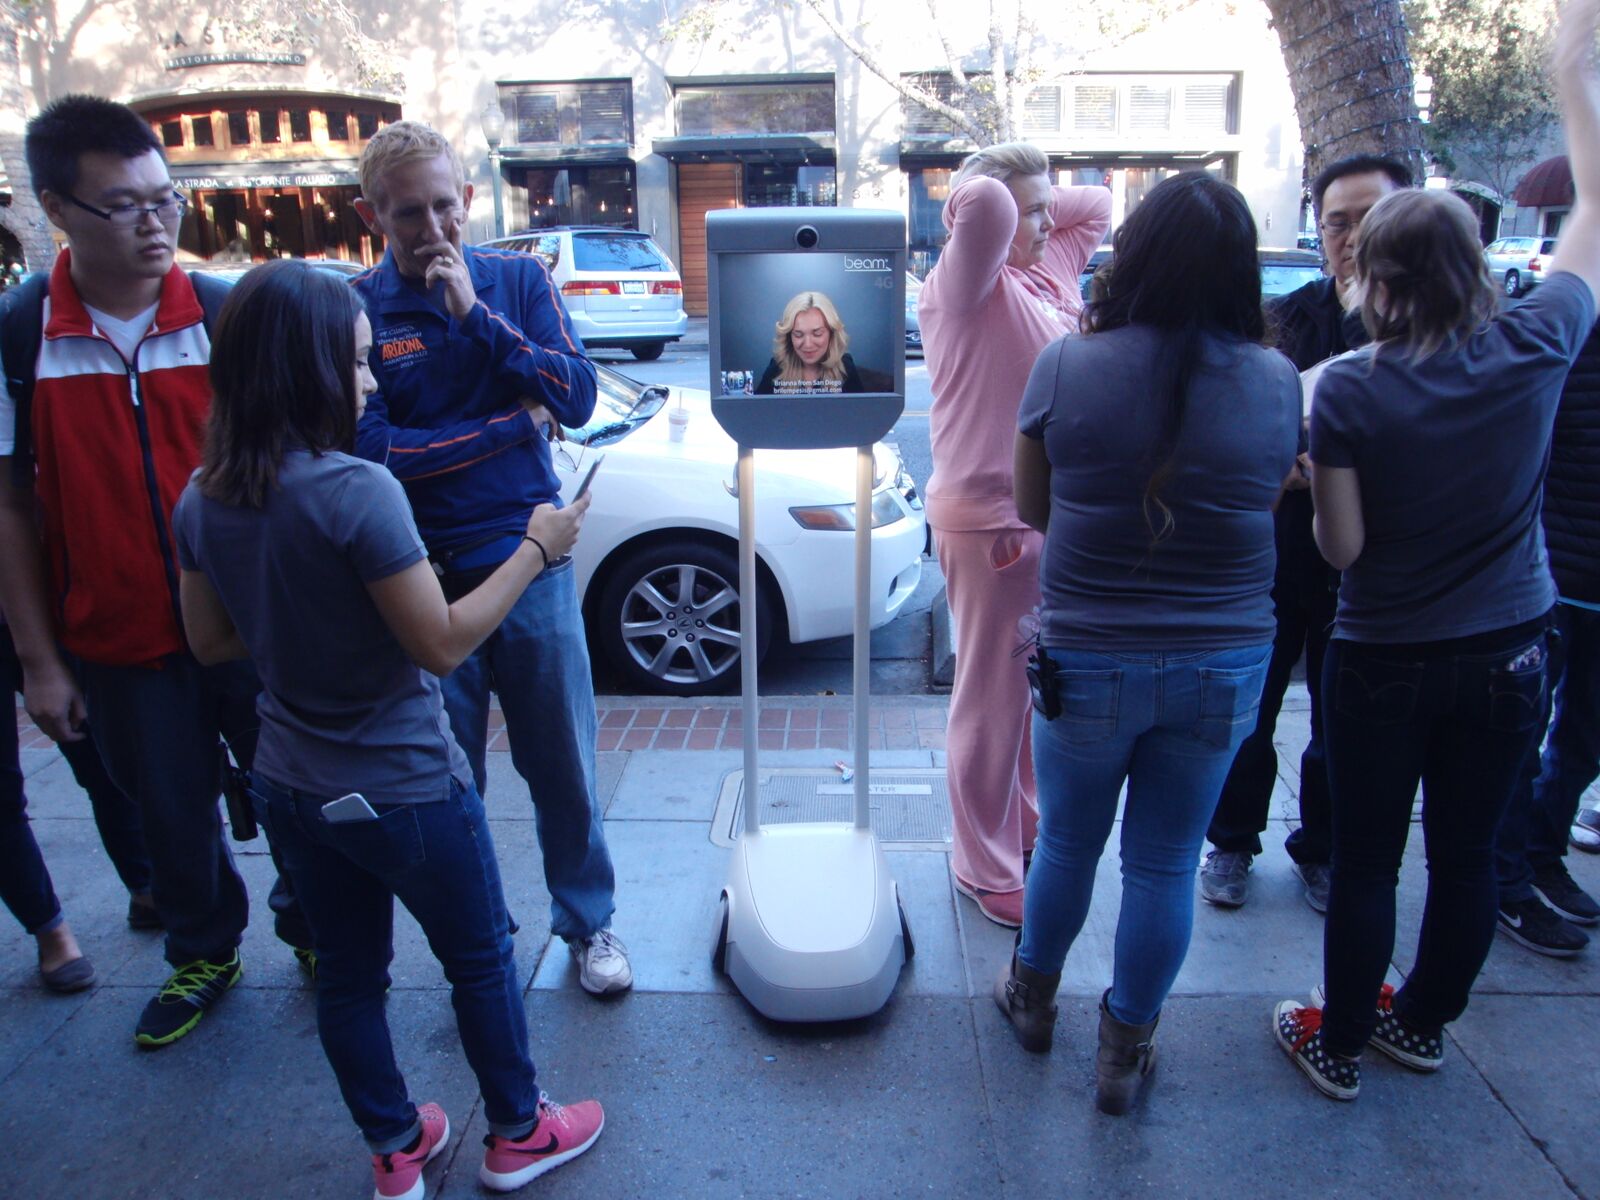 Using a BeamPro, Brianna Lempesis waits in line to buy an iPhone6s from the Apple Store in downtown Palo Alto. Photo: Suitable Technologies.